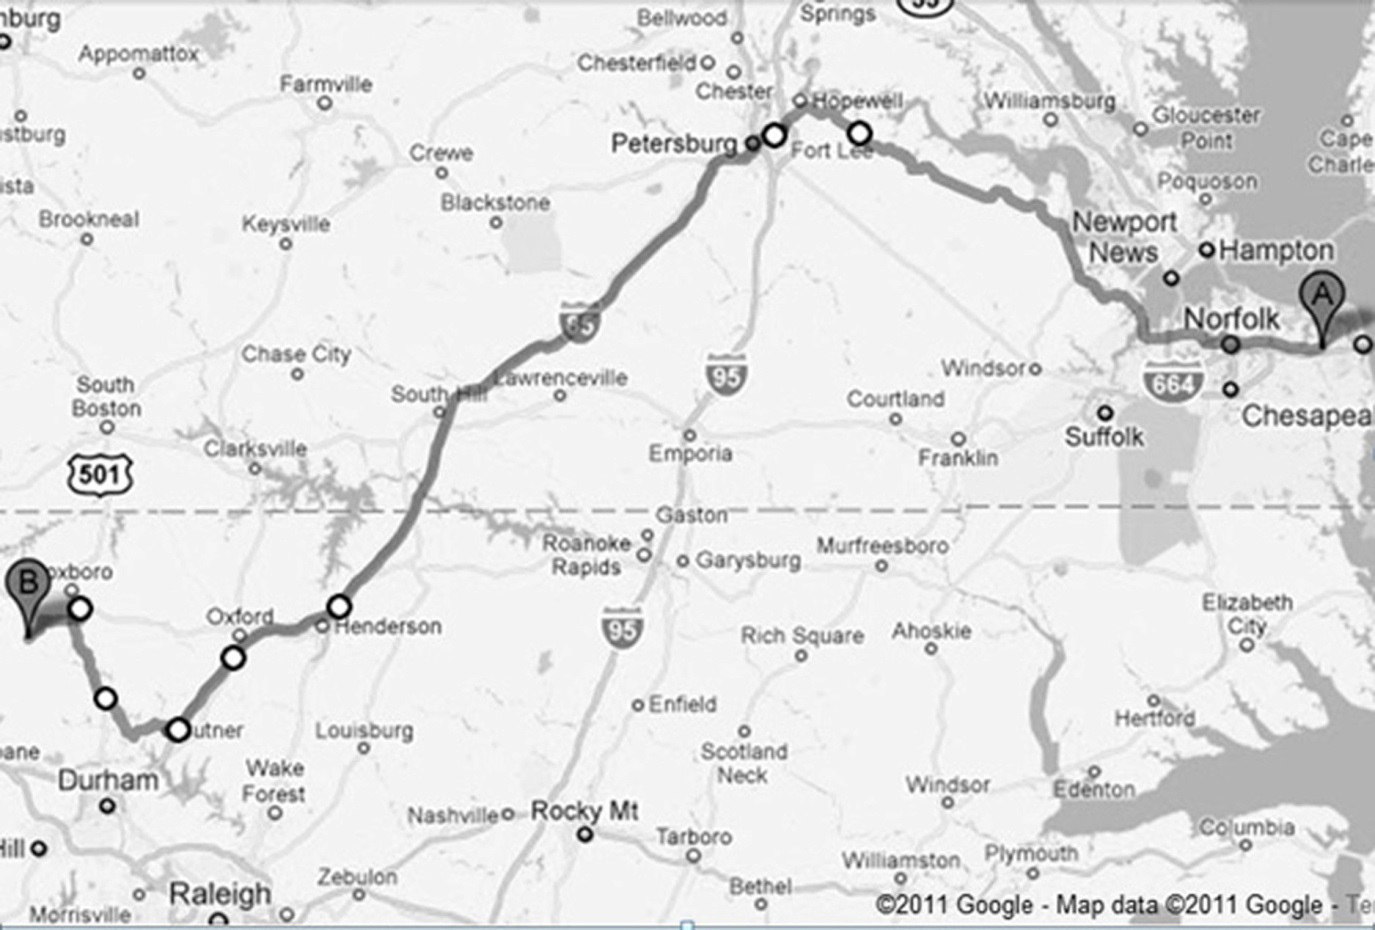 Route to NC from VA